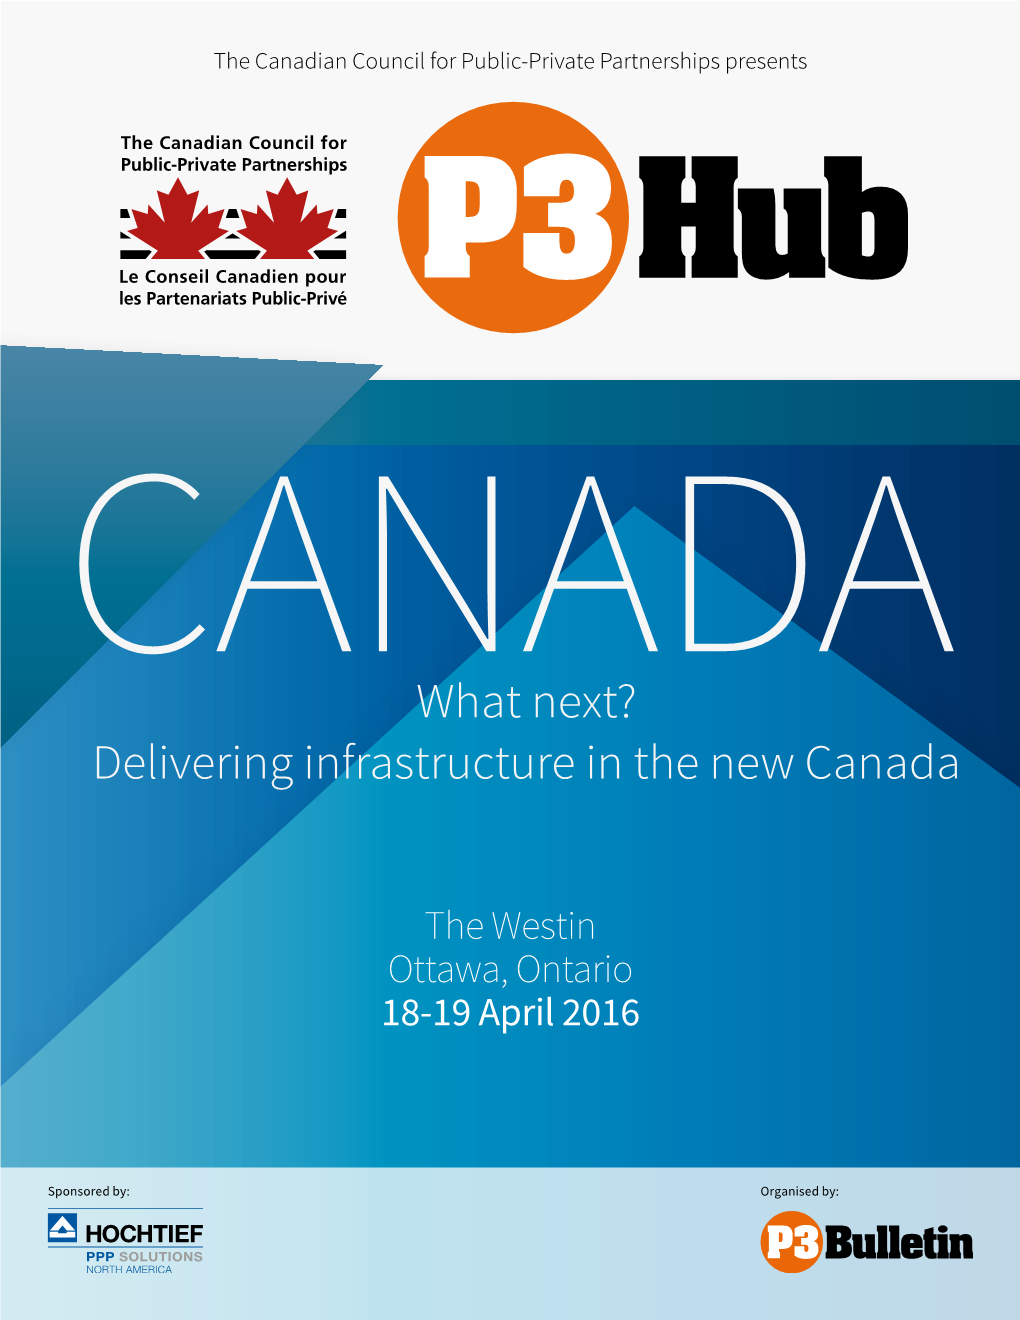 Delivering Infrastructure in the New Canada